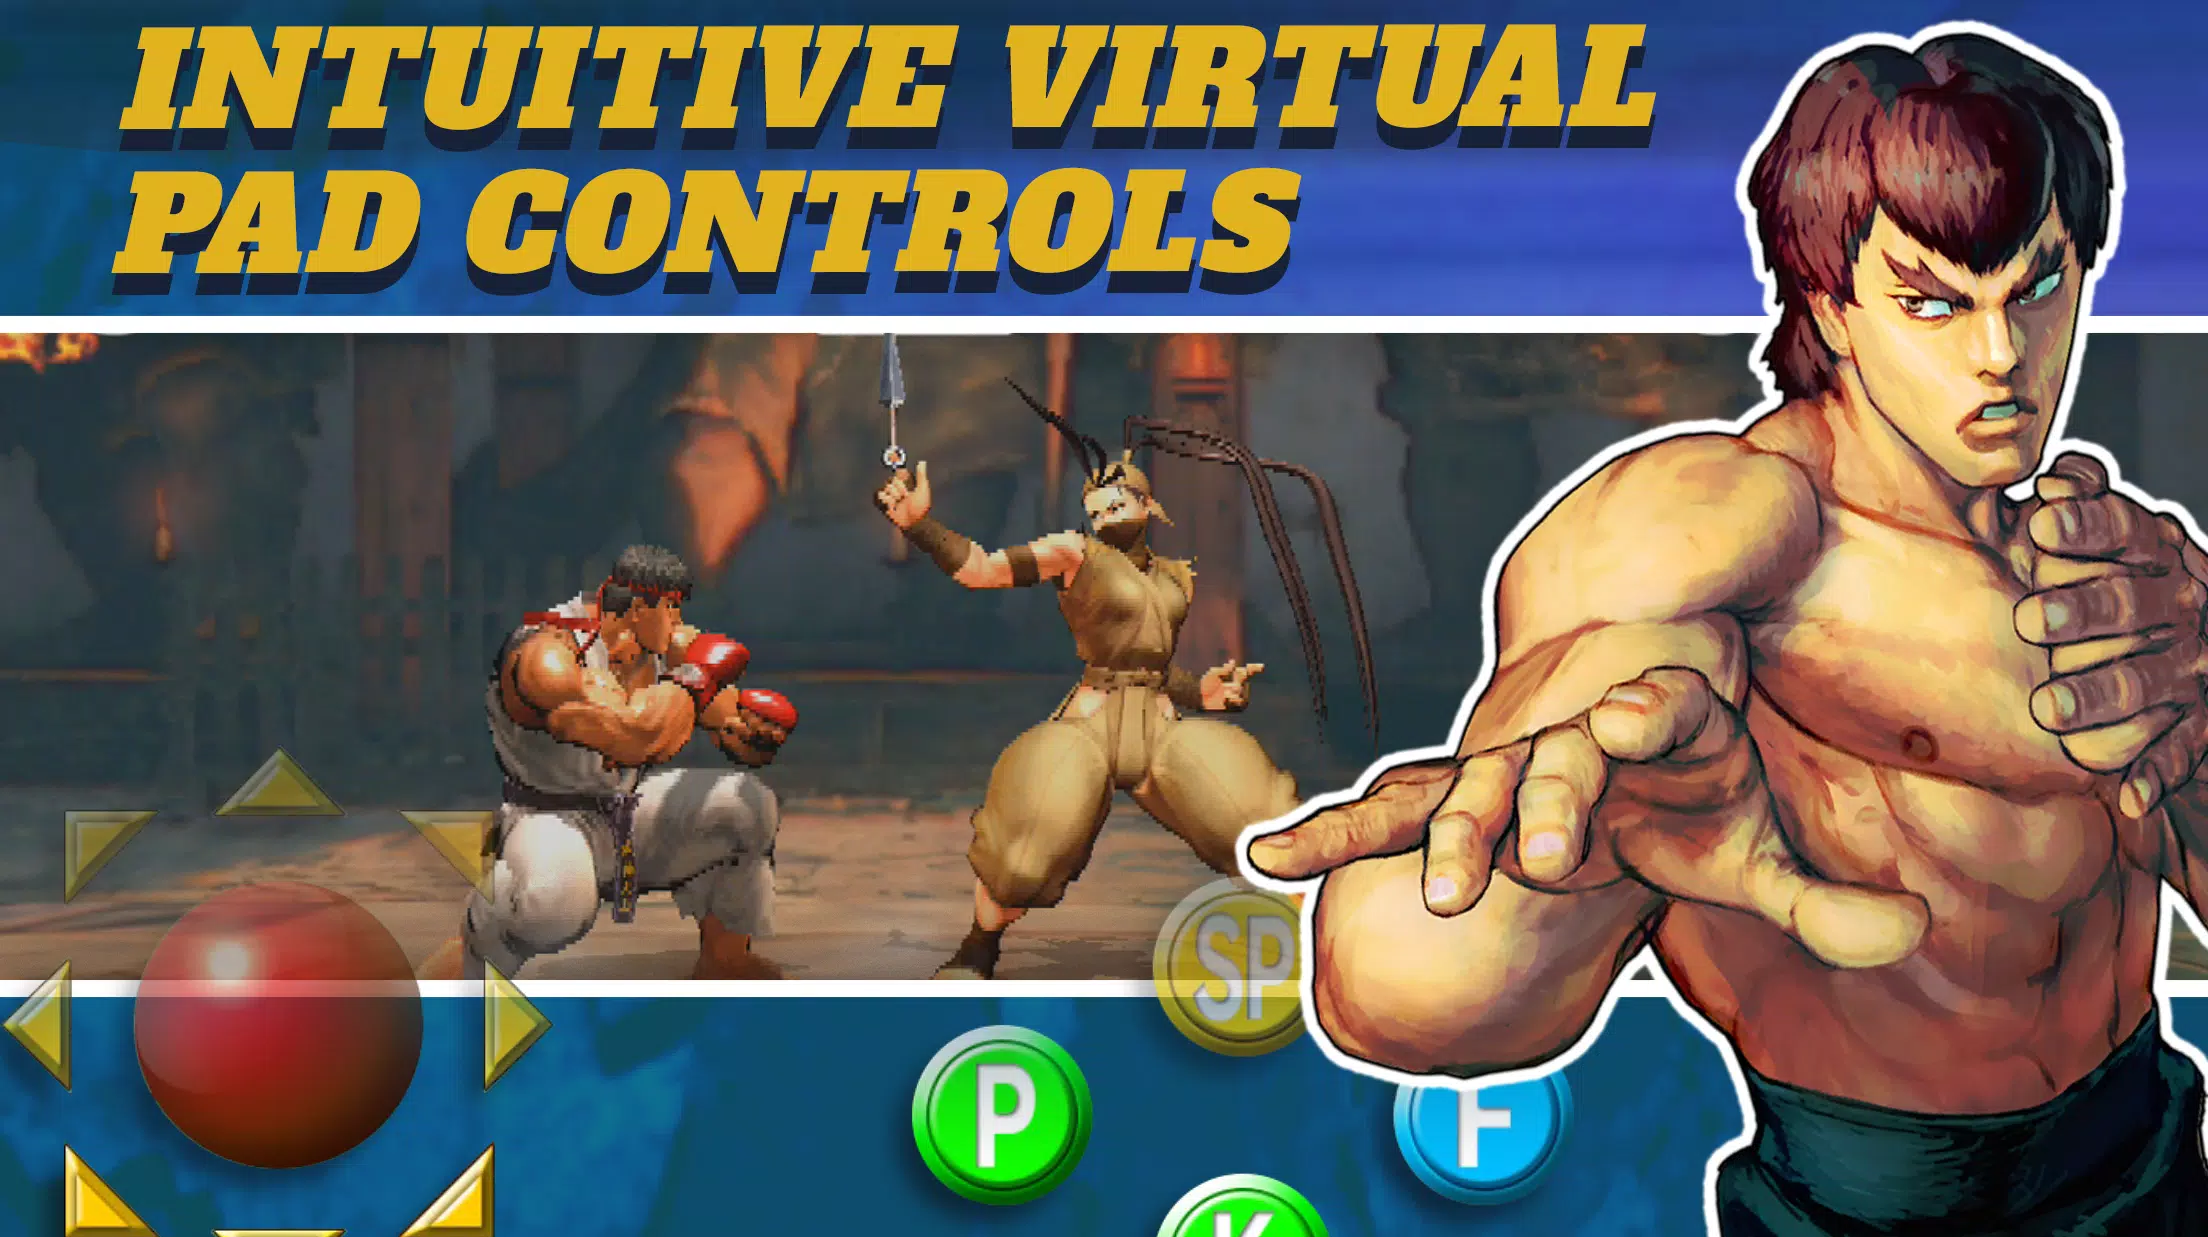 Download Game Street Fighter Apk Android - Colaboratory